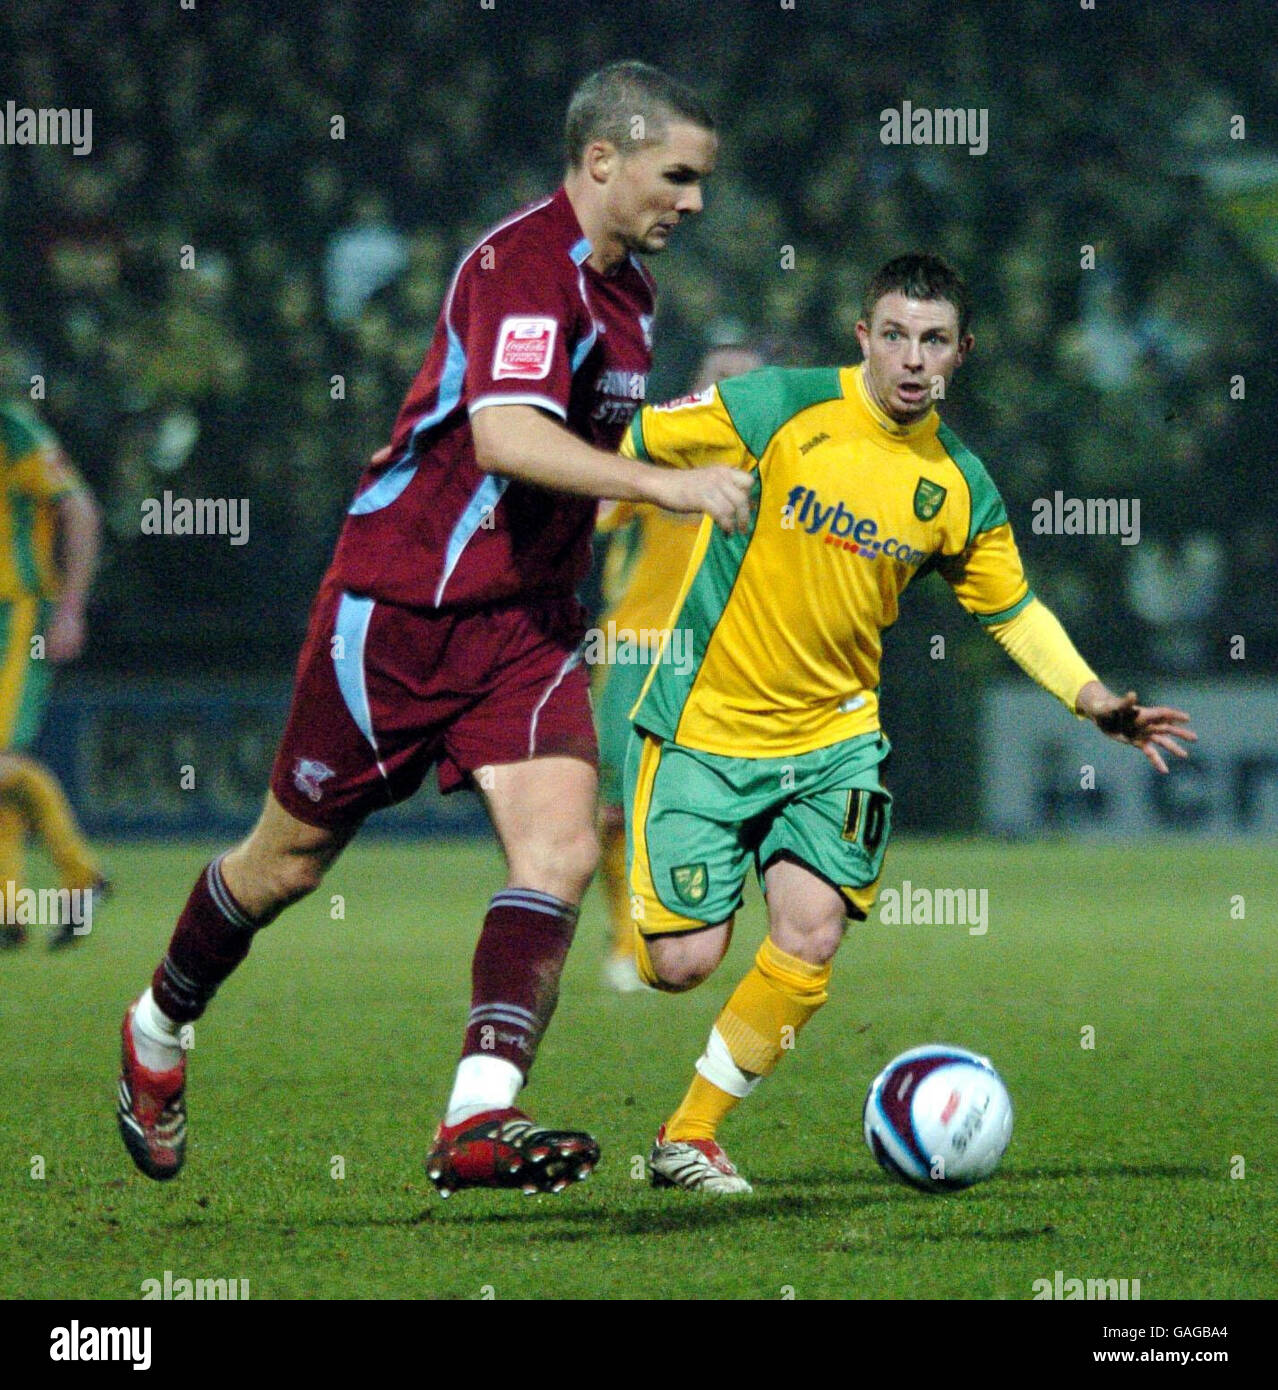 Scunthorpe's Jim Goodwin (left) and Norwich's Jamie Cureton in action during the Coca-Cola Football League Championship match at Glanford Park, Scunthorpe. Stock Photo